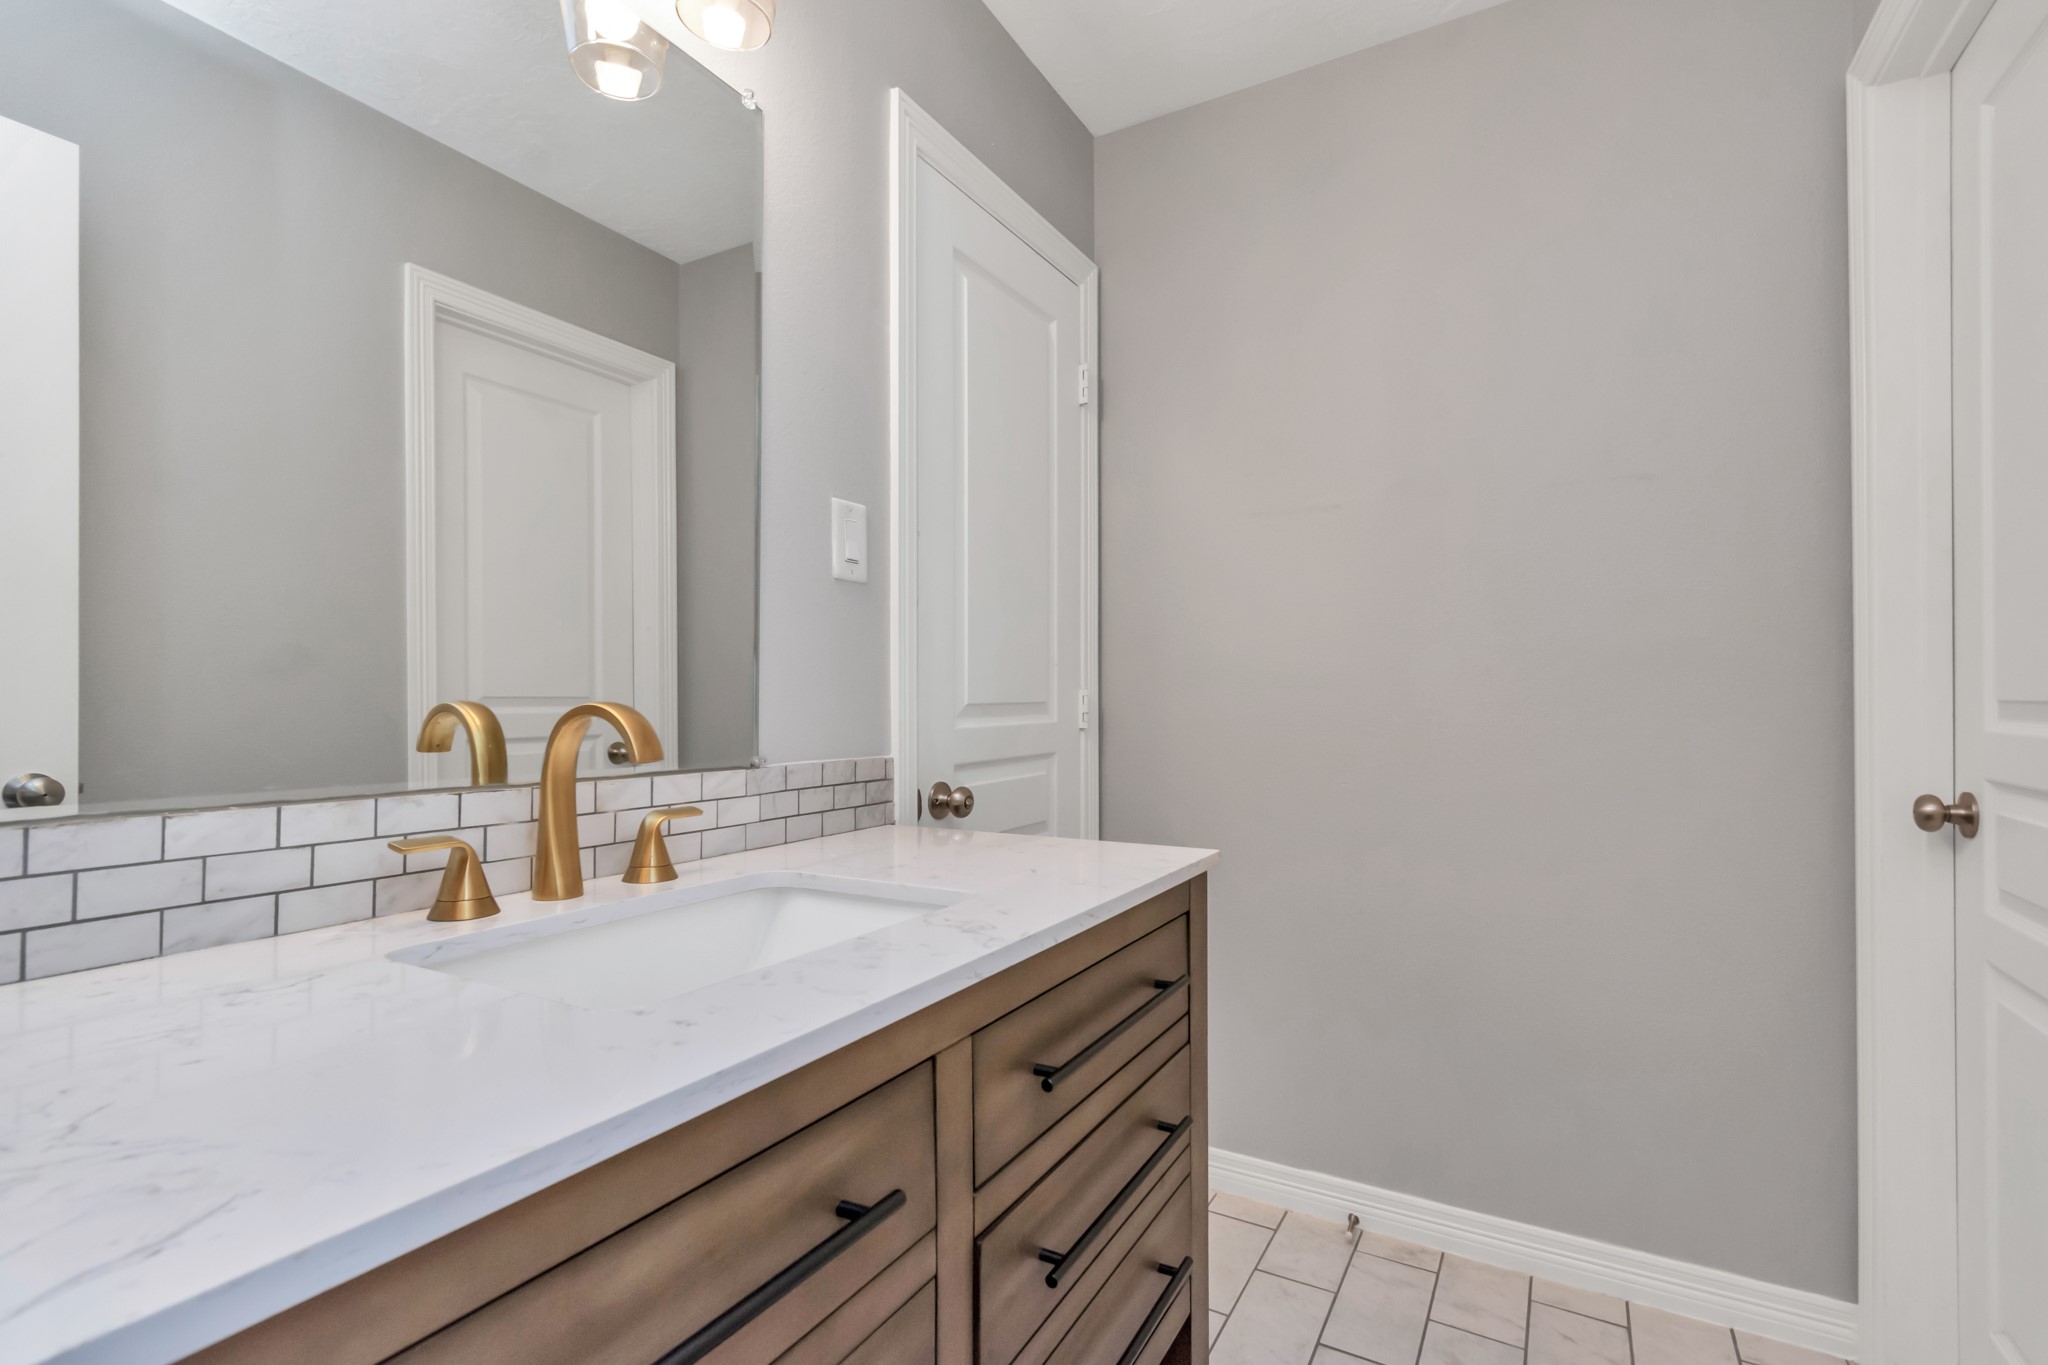 The Hollywood bathroom is conveniently accessible from both bedrooms and the hallway, offering ease of use and enhancing the layout of the home.